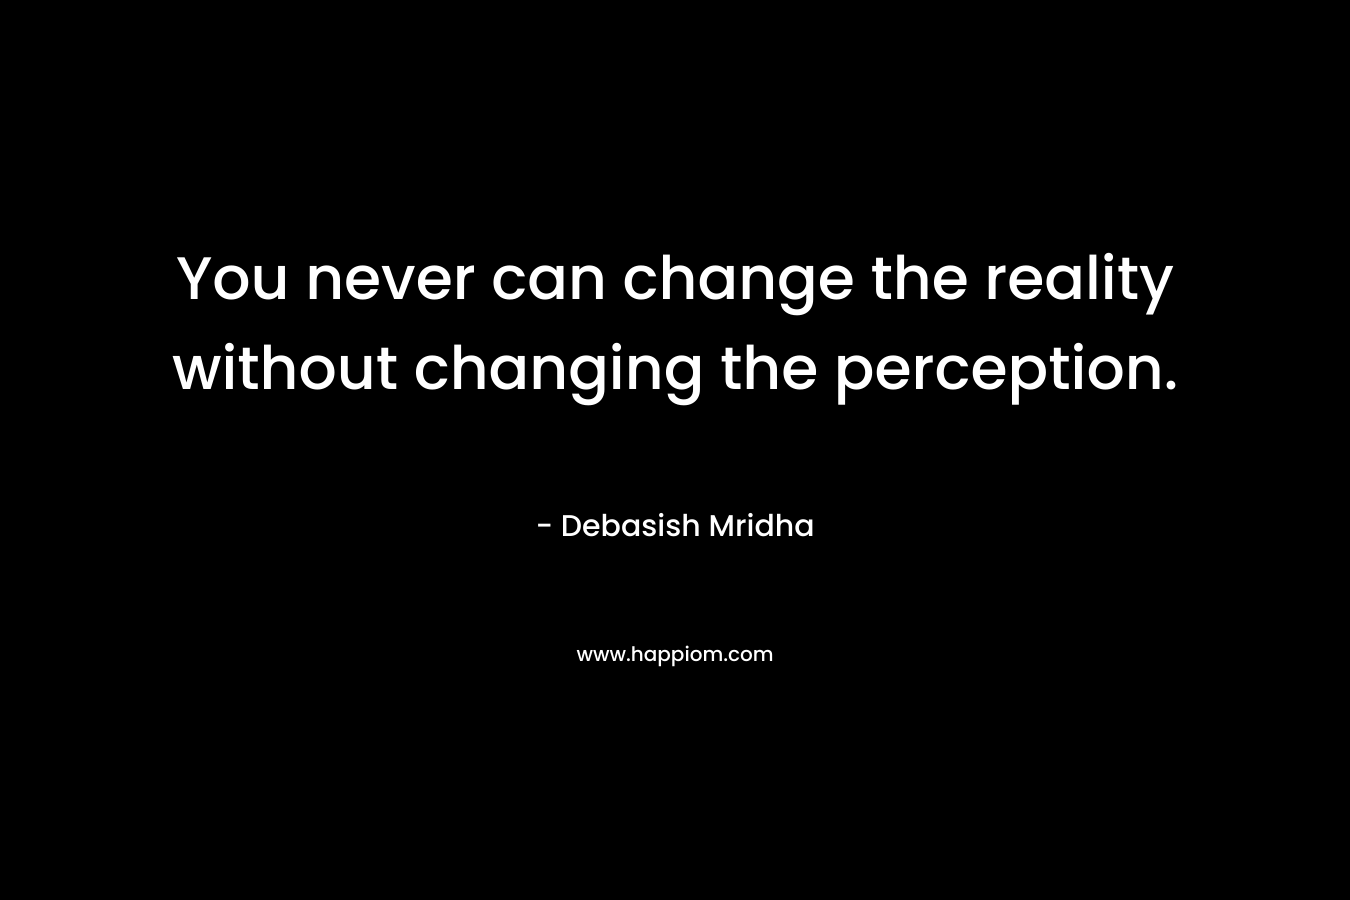 You never can change the reality without changing the perception.